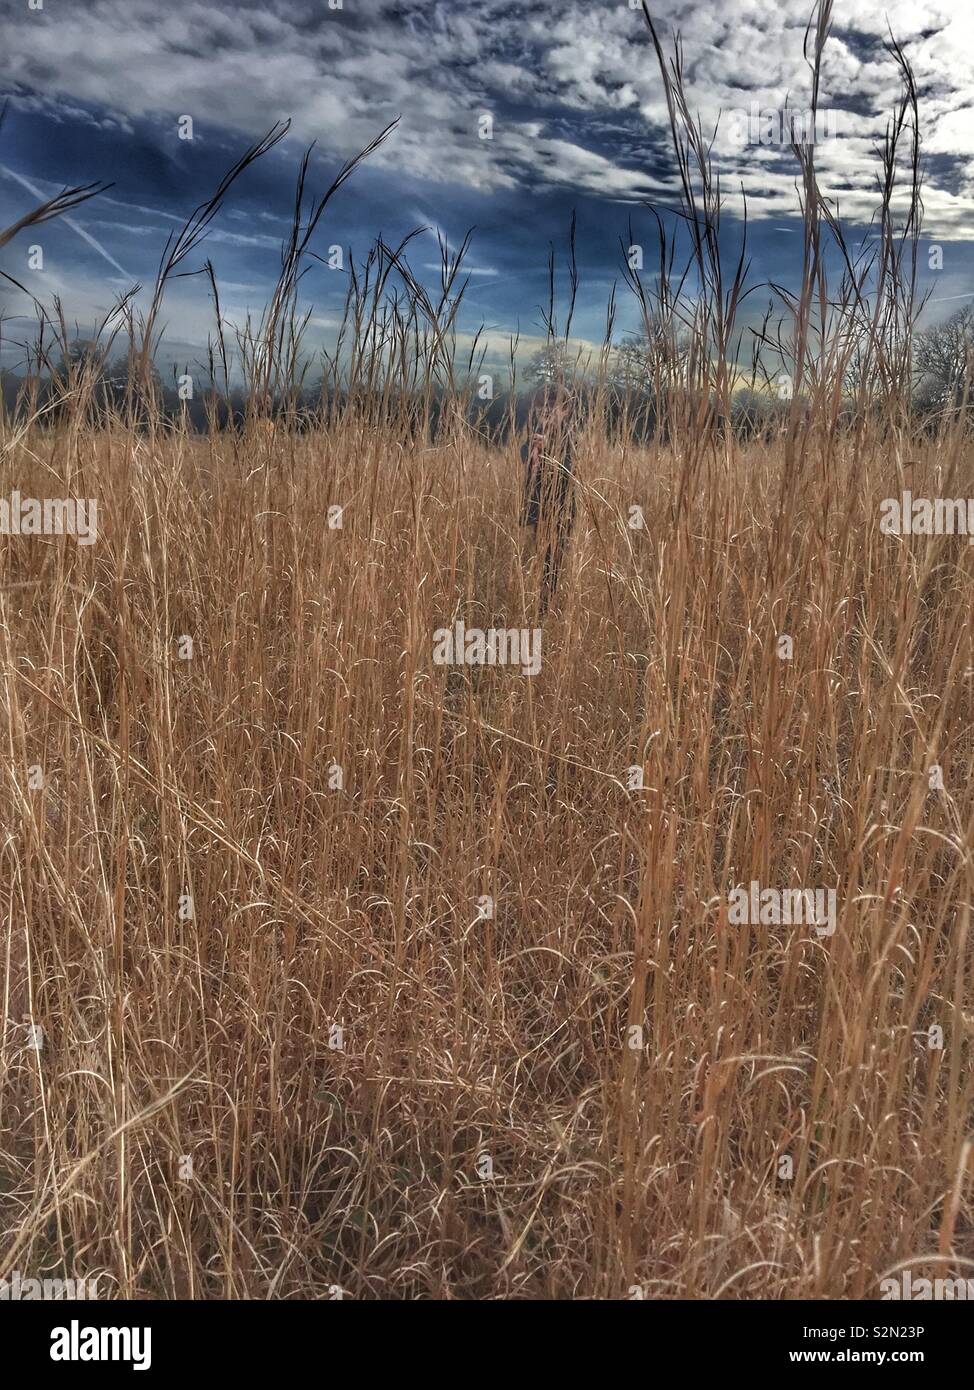 Find me (small child hiding in tall grass) Stock Photo